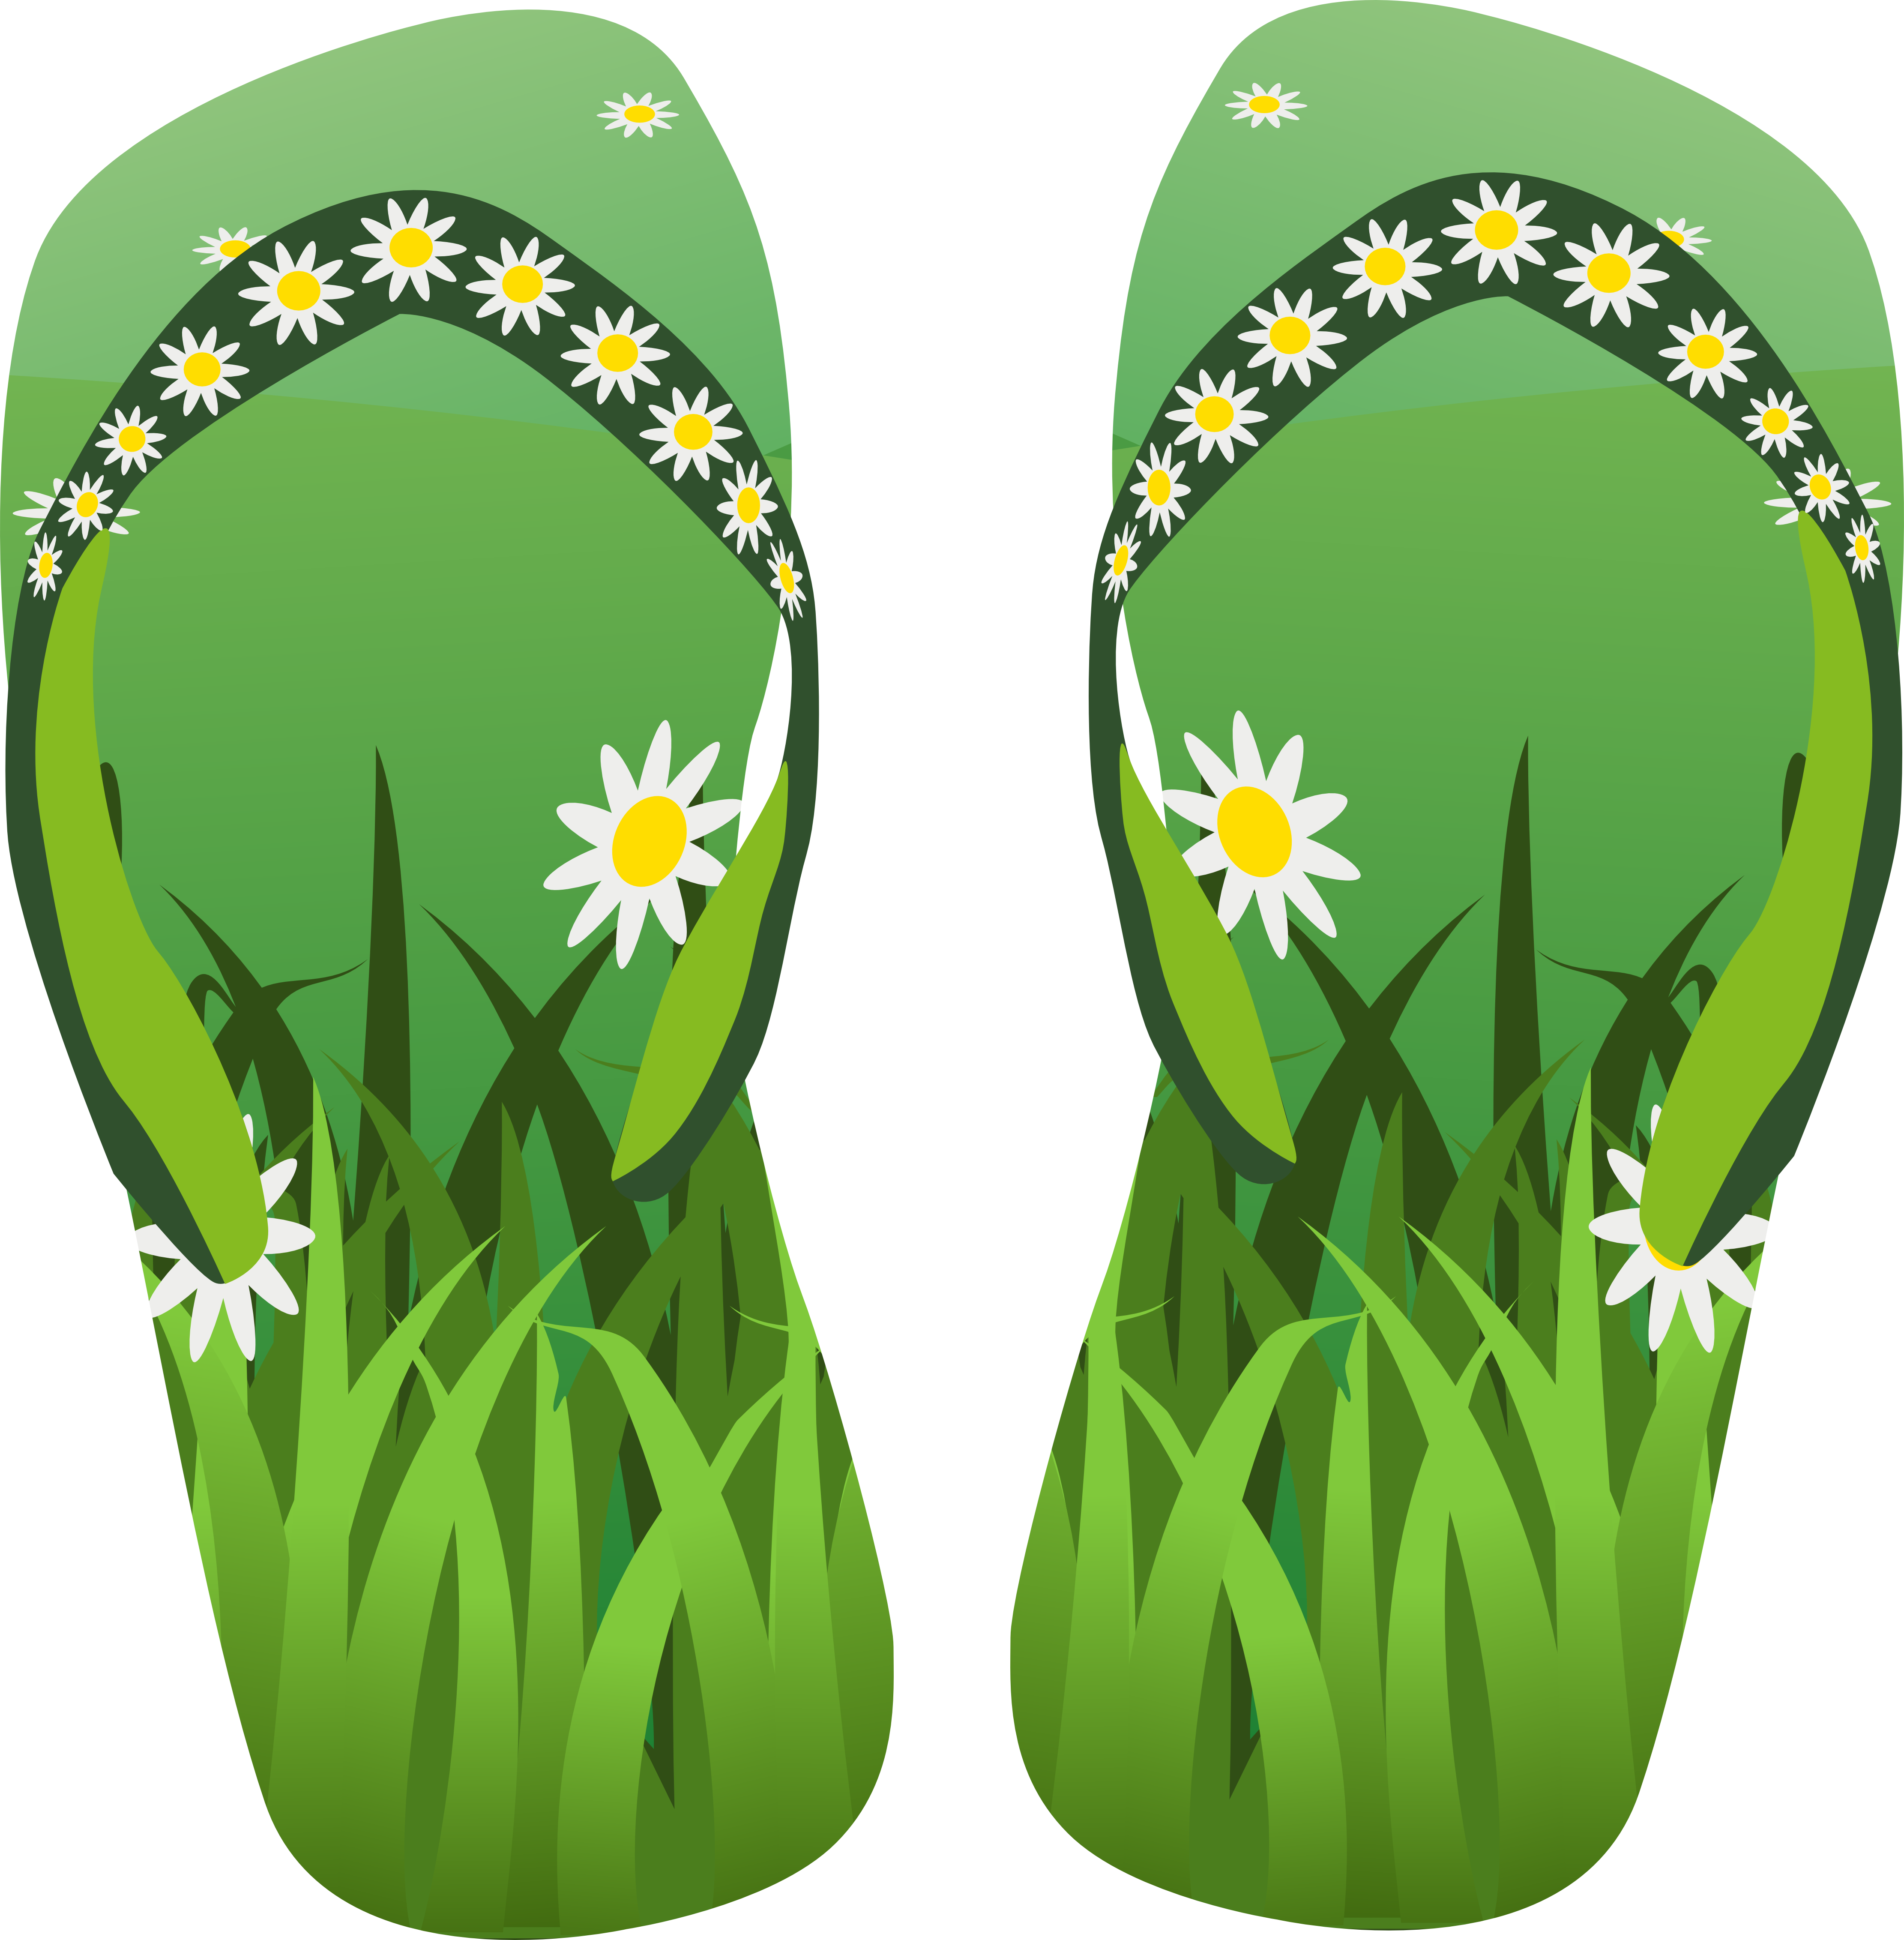 A Pair Of Flip Flops With Flowers And Grass